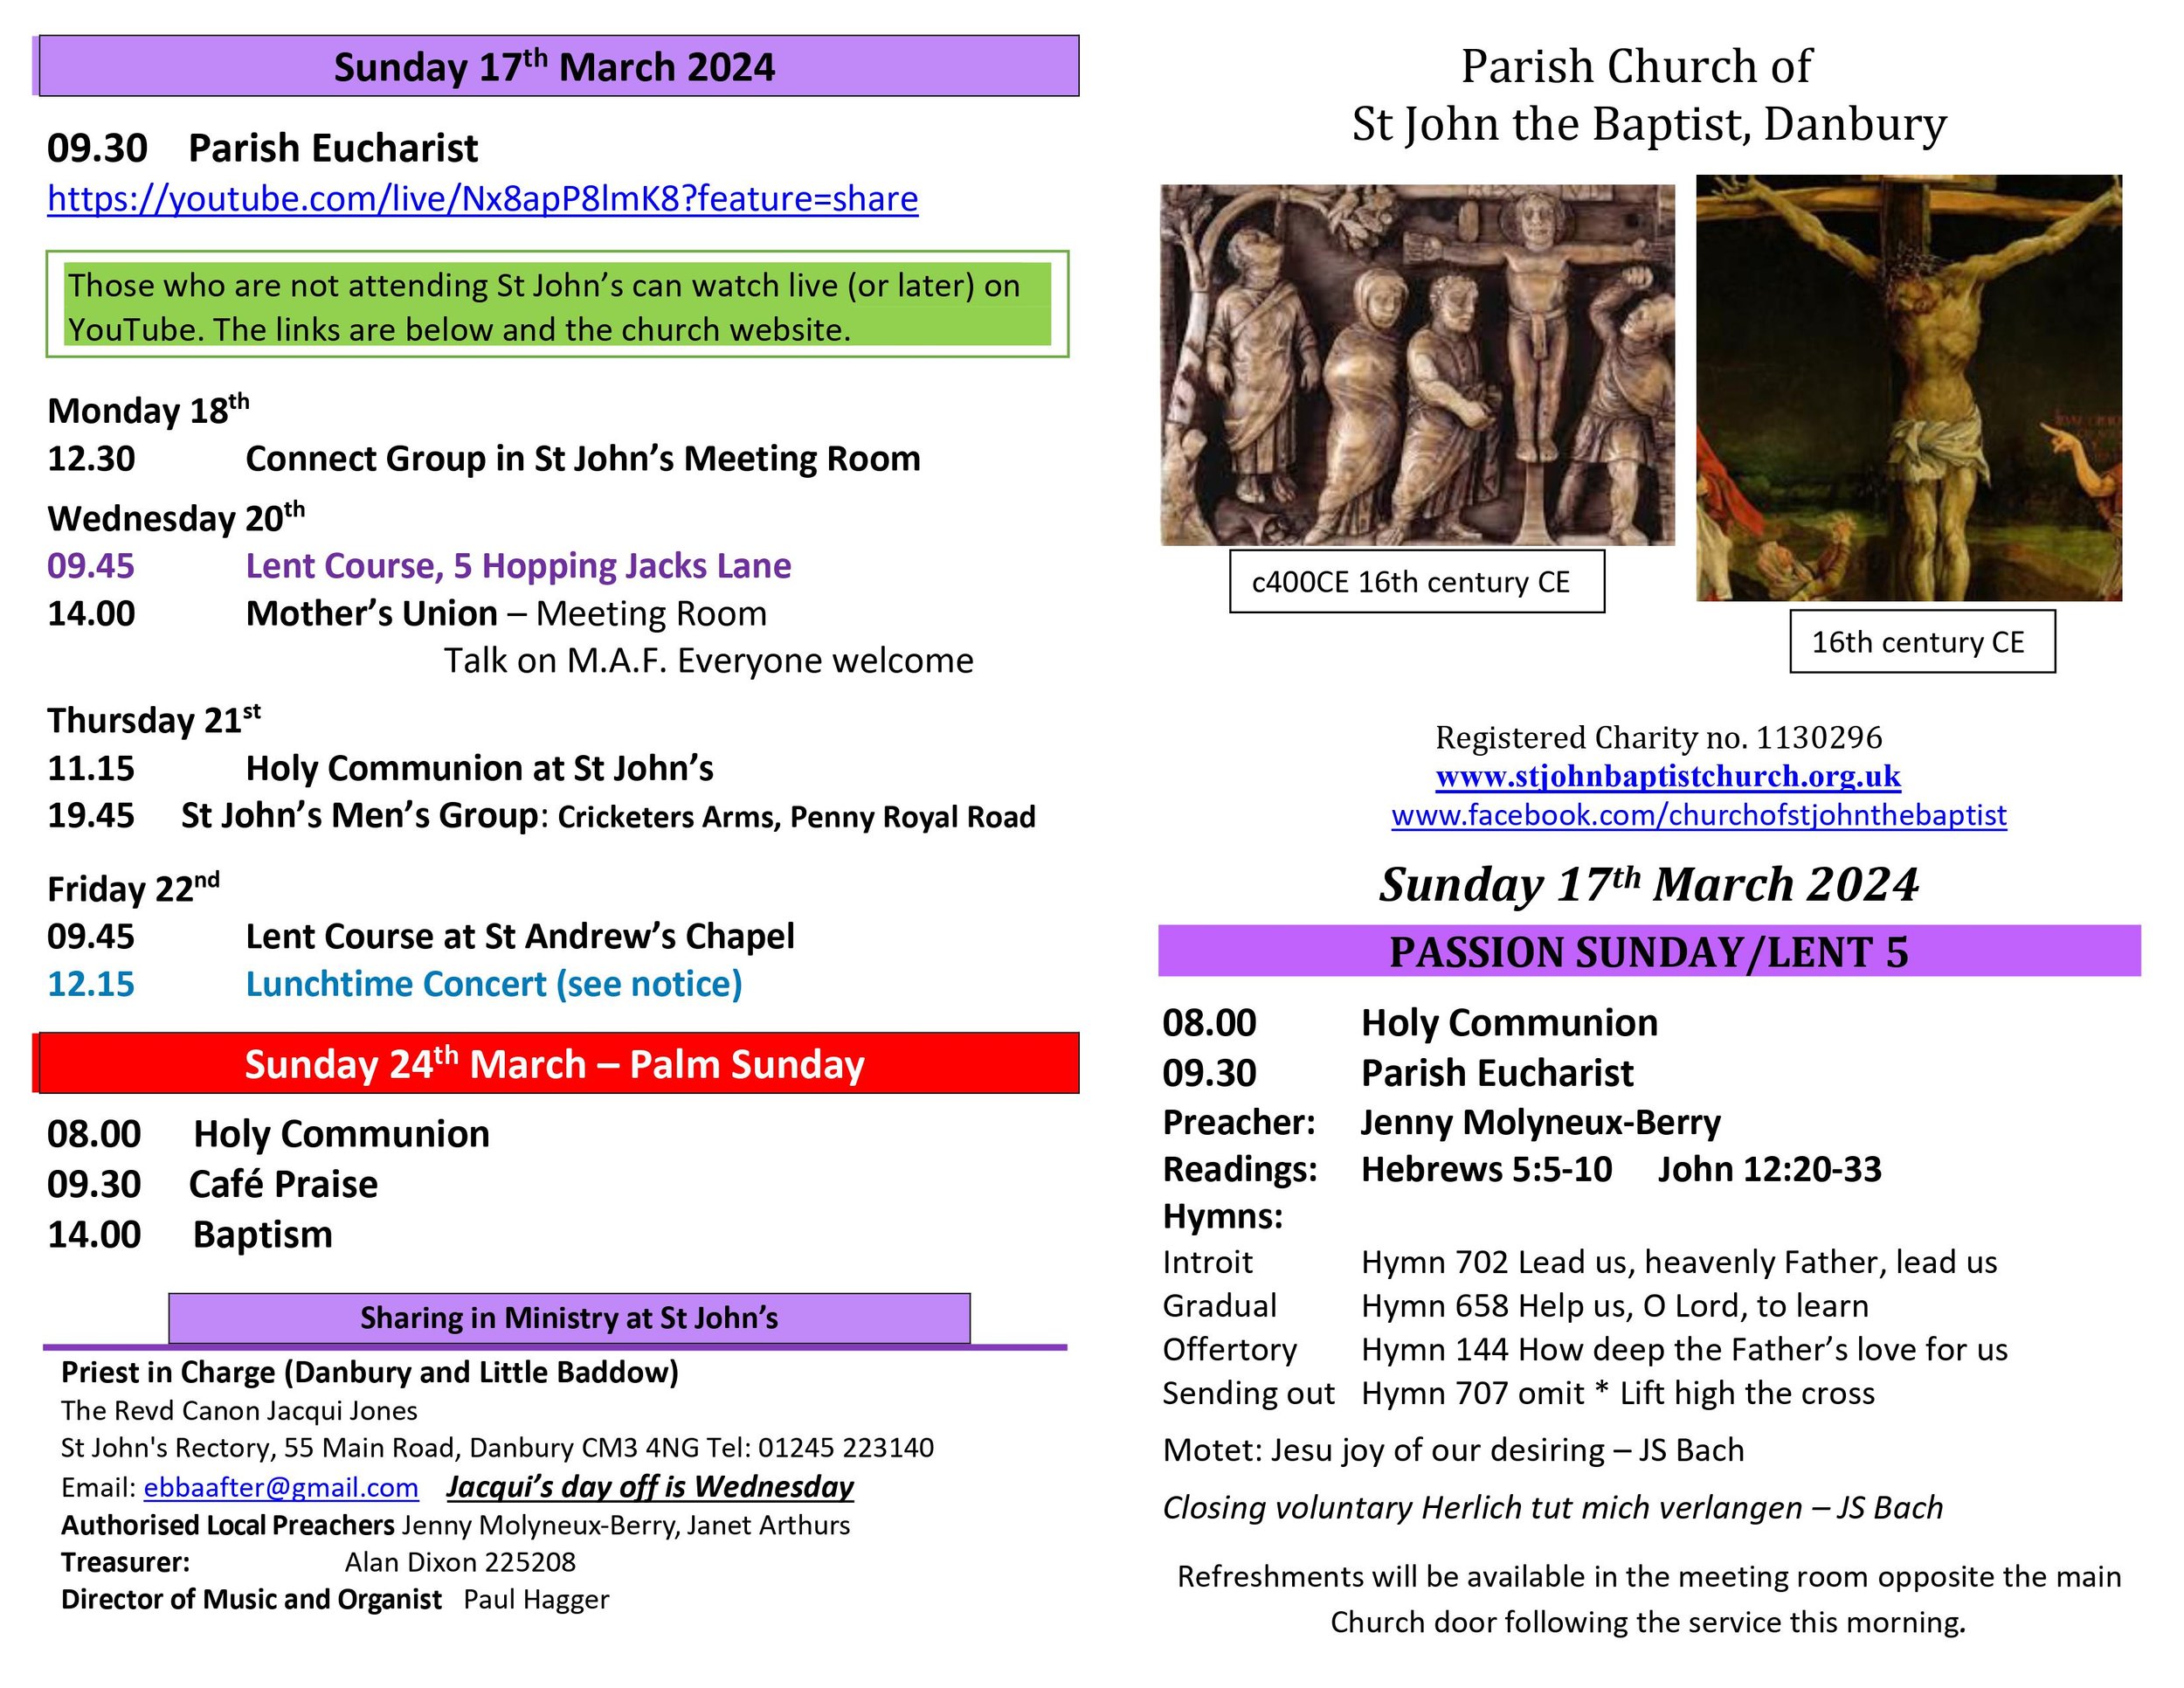 Pew leaflet 17th March 2024 Passion Sunday Lent 5-images-1.jpg